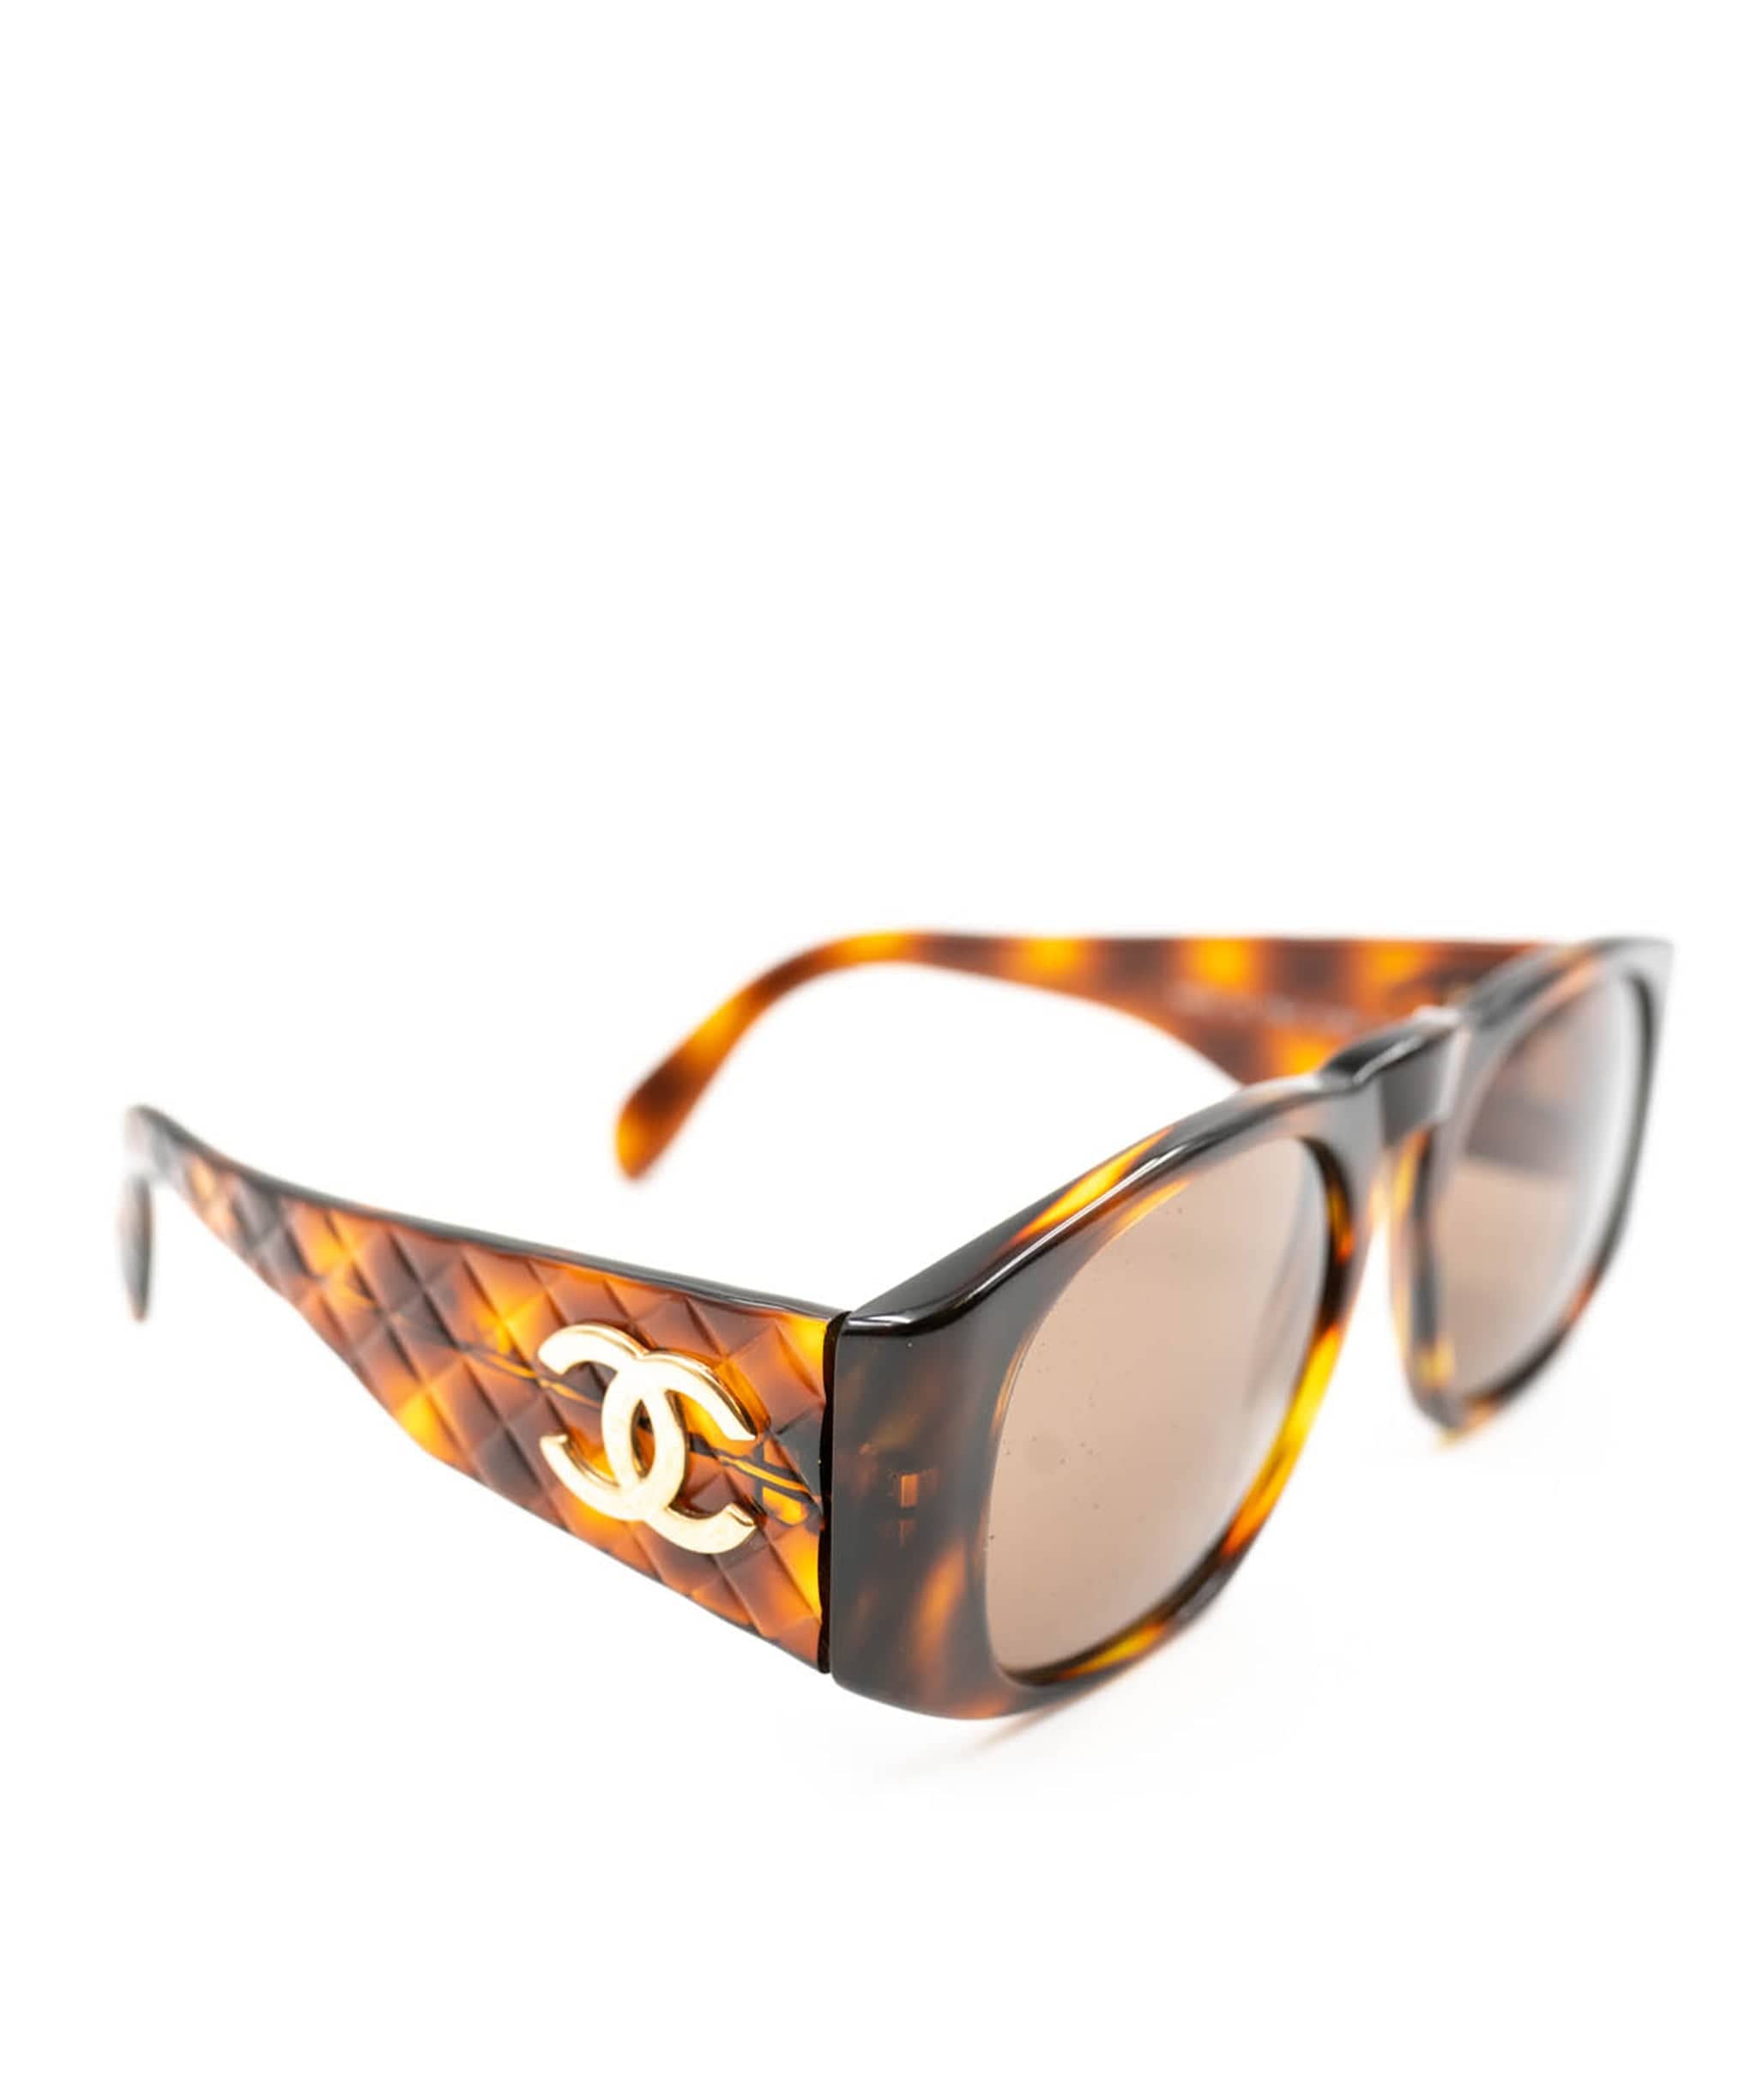 Chanel Chanel Vintage Tortoiseshell with Quilted Arm and CC logo - AWL3602